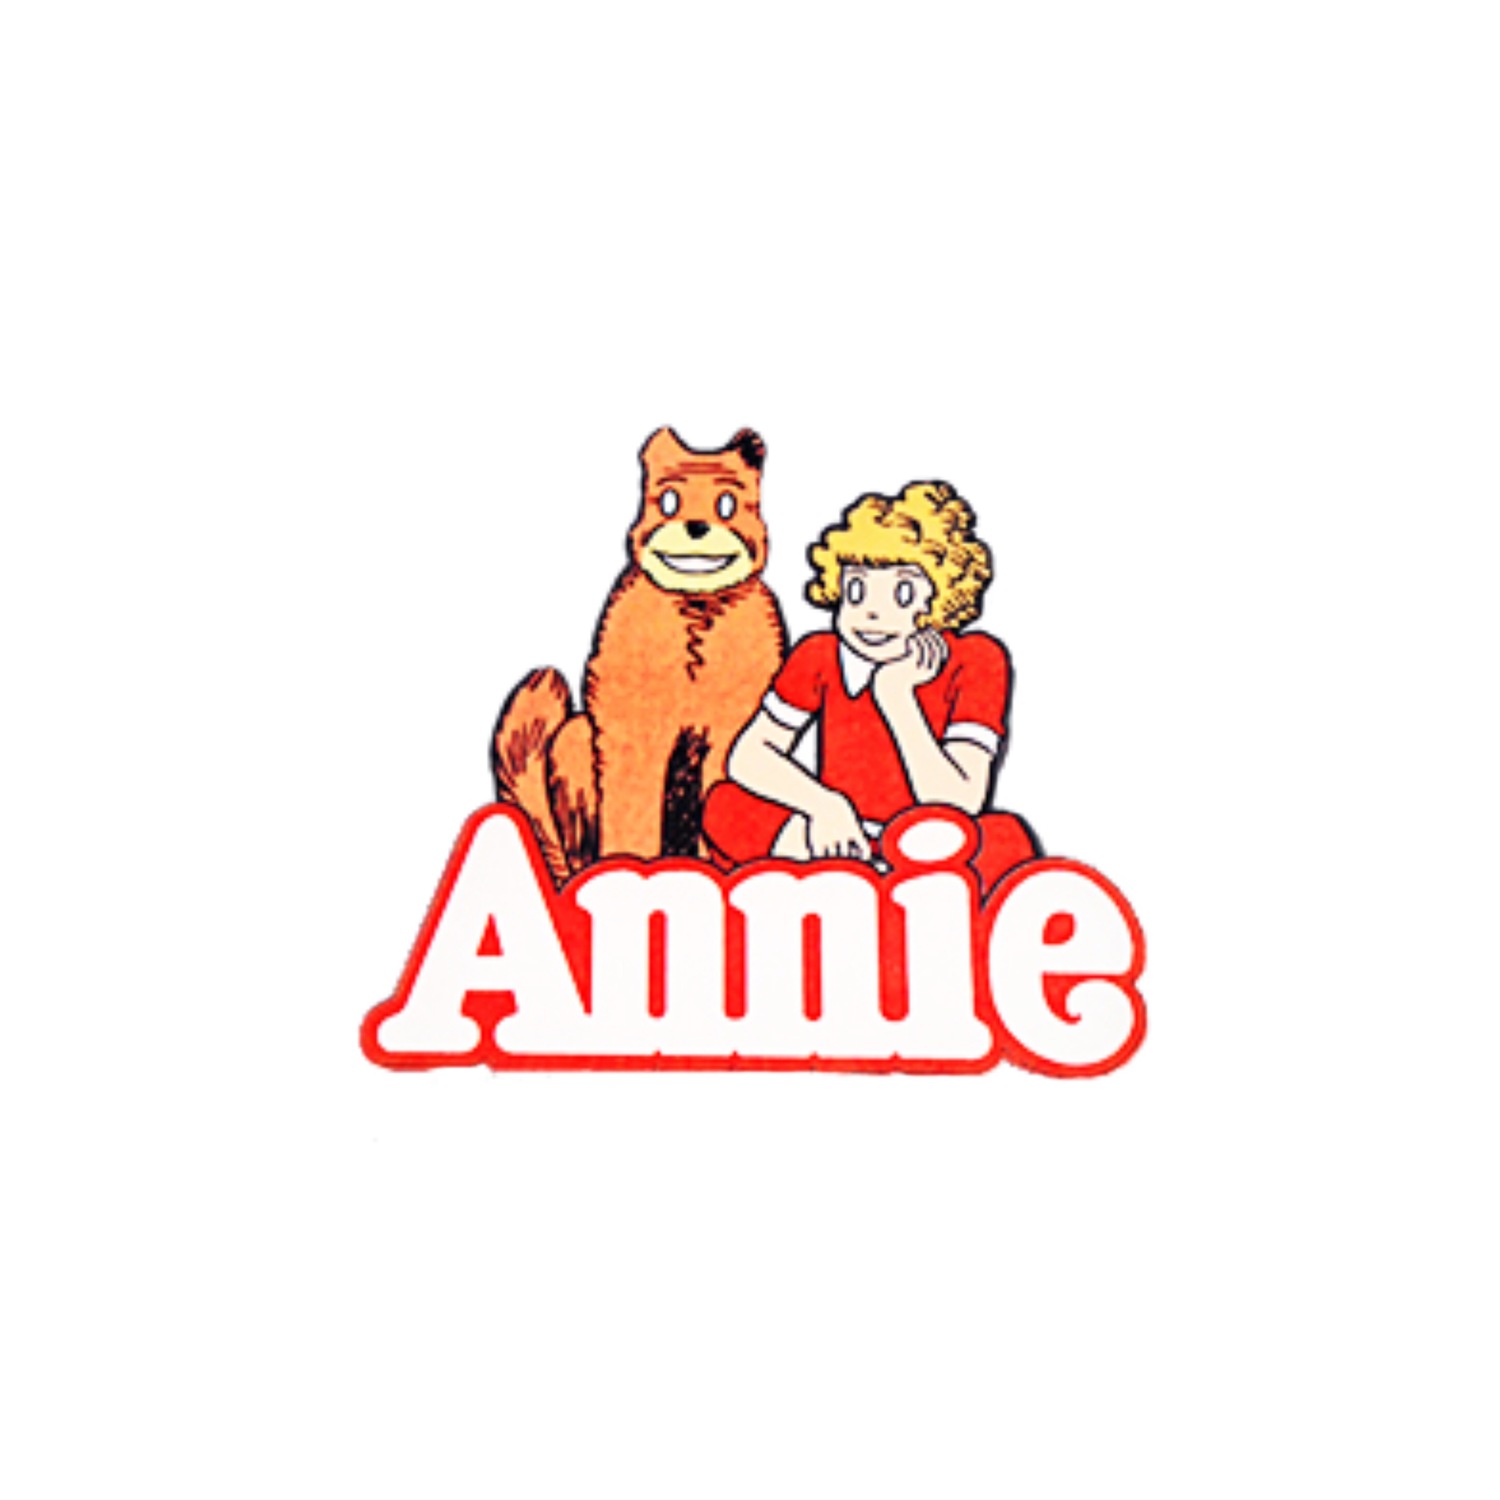 The Annie poster for the Alban Arts Center’s production of Annie the Musical. 2